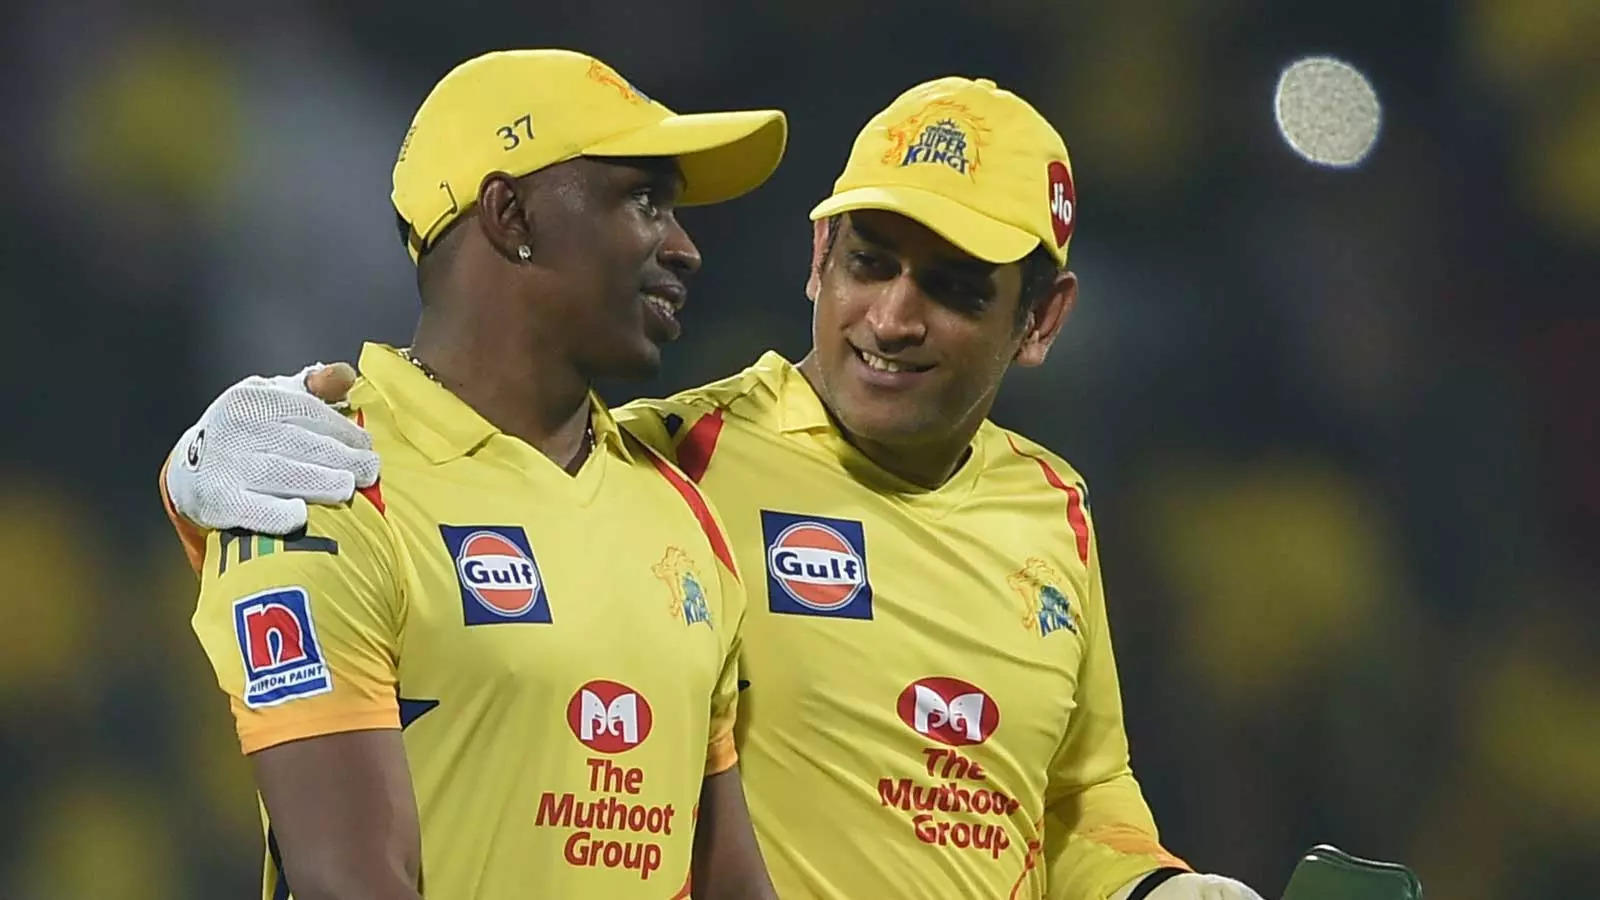 Dwayne Bravo was trolled by MS Dhoni in a video shared by CSK